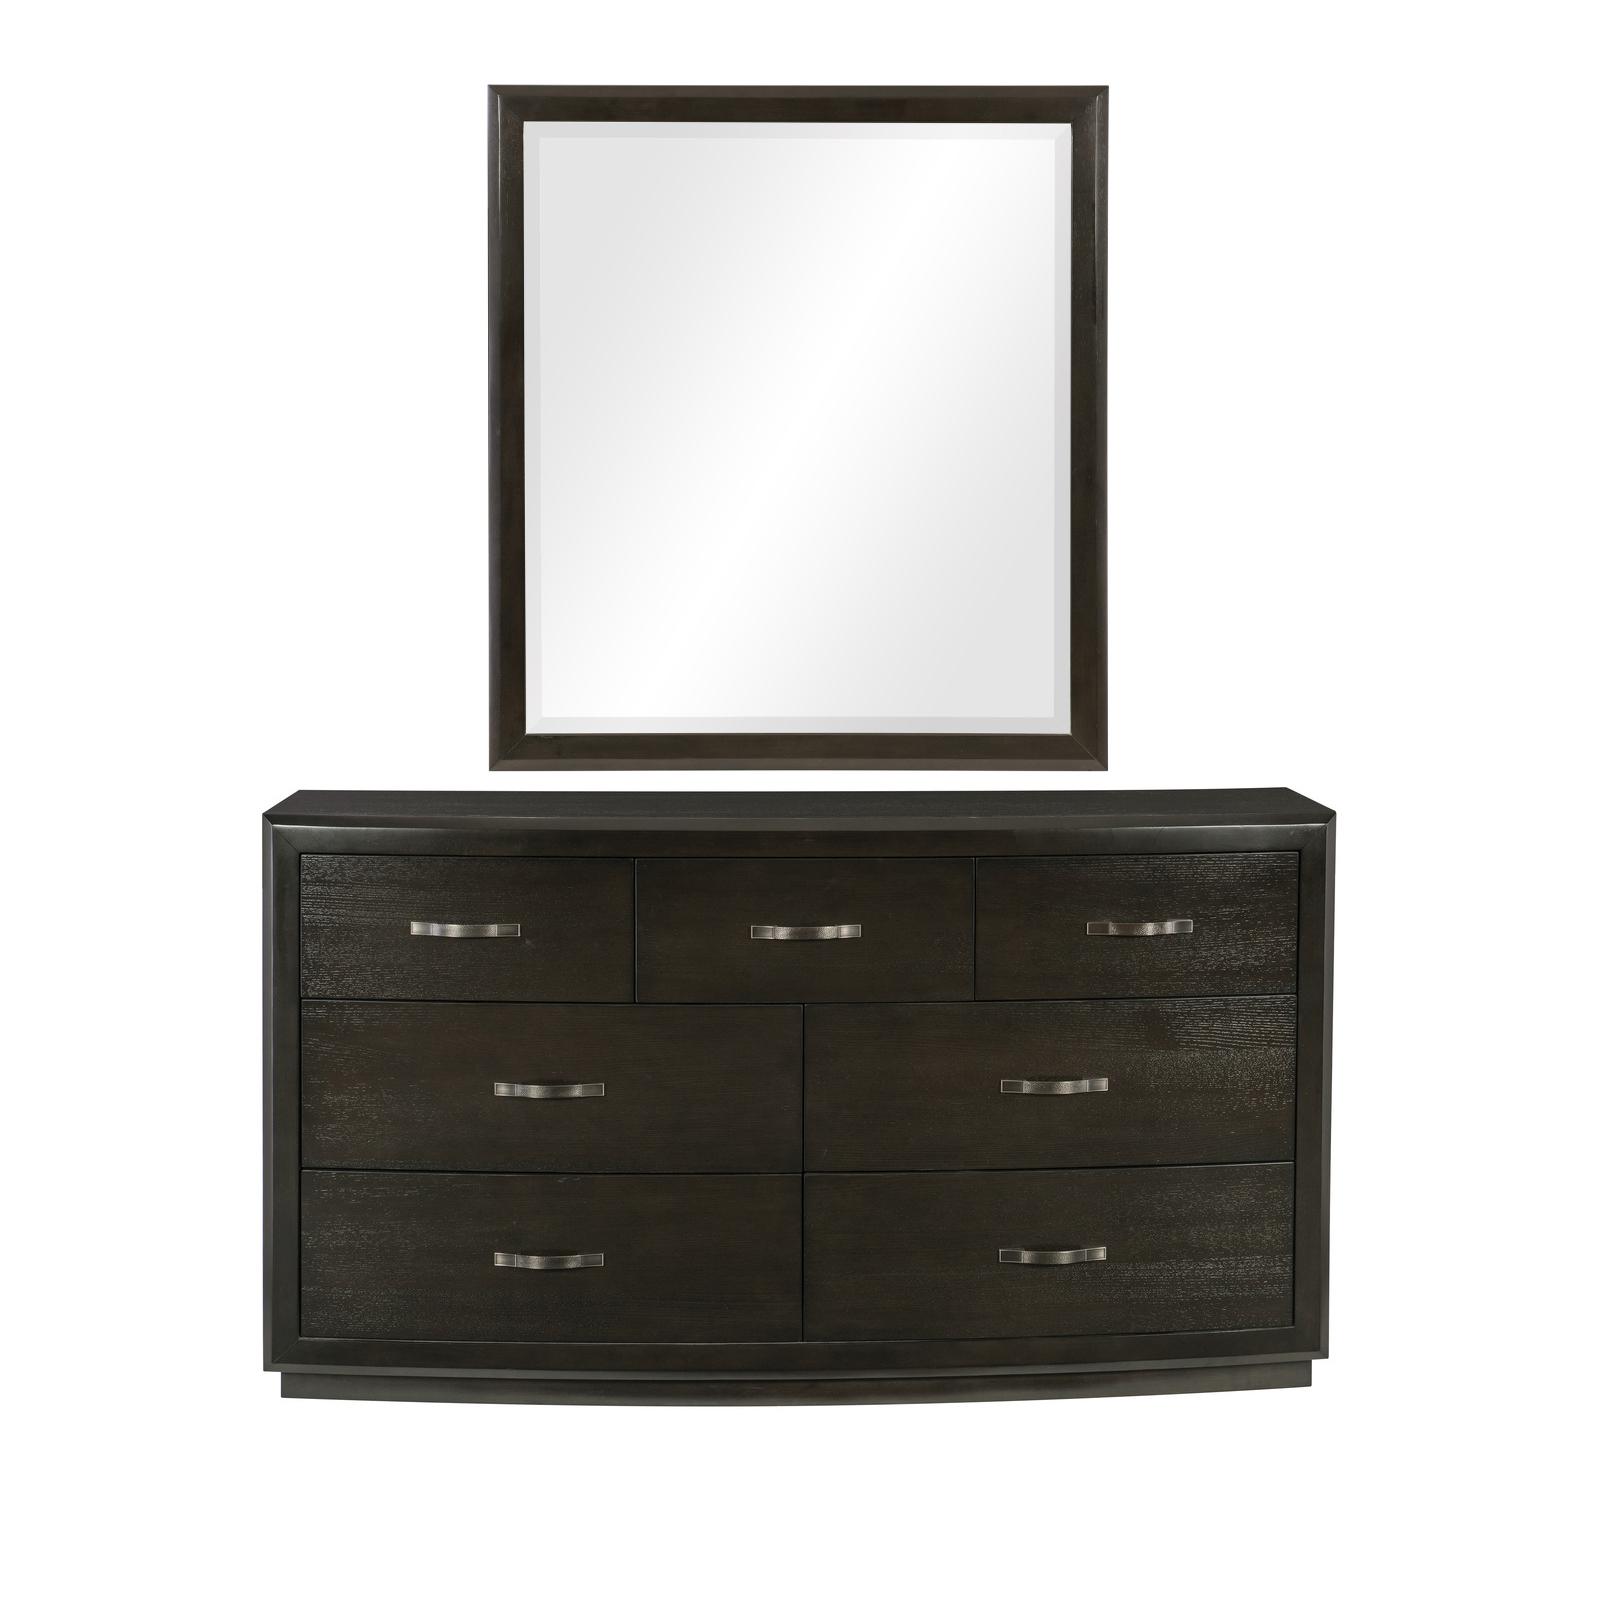 Transitional Dresser w/Mirror 1575-5*2PC Hodgin 1575-5*2PC in Charcoal 